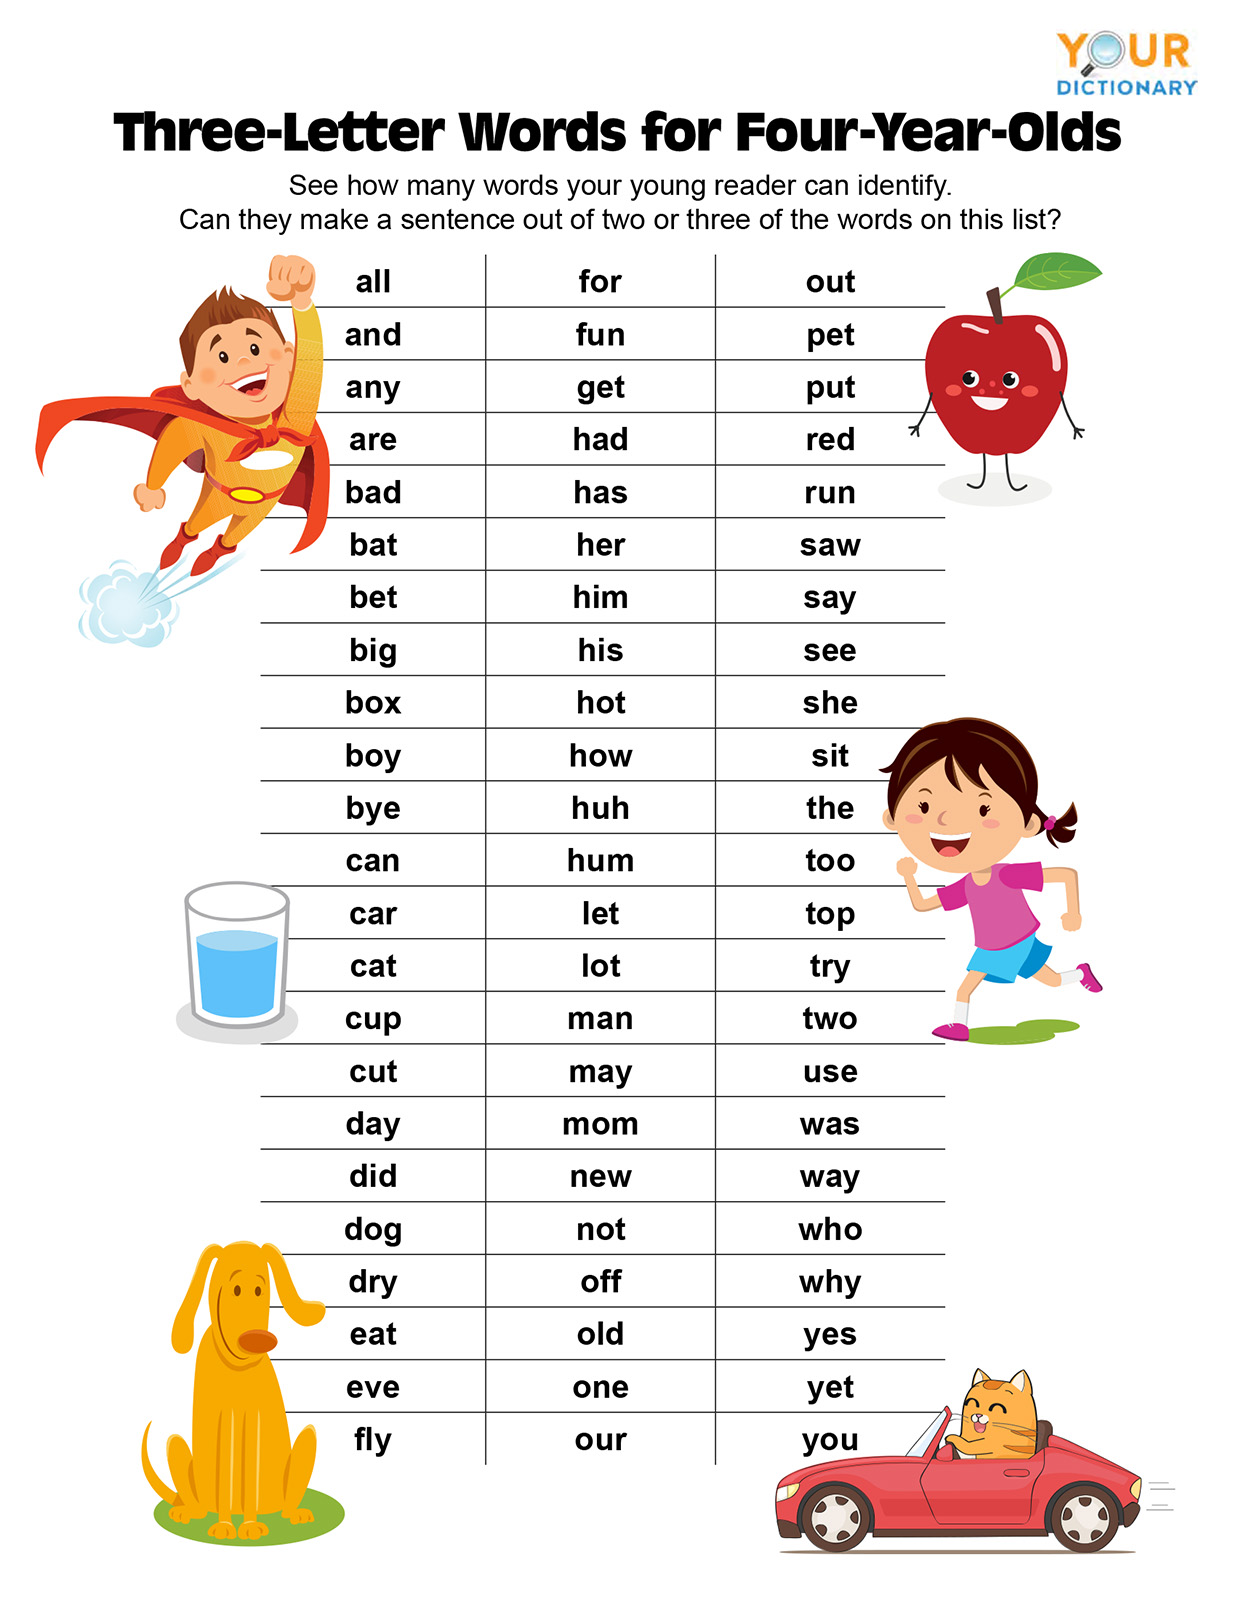 Three-Letter Words for Four-Year-Olds